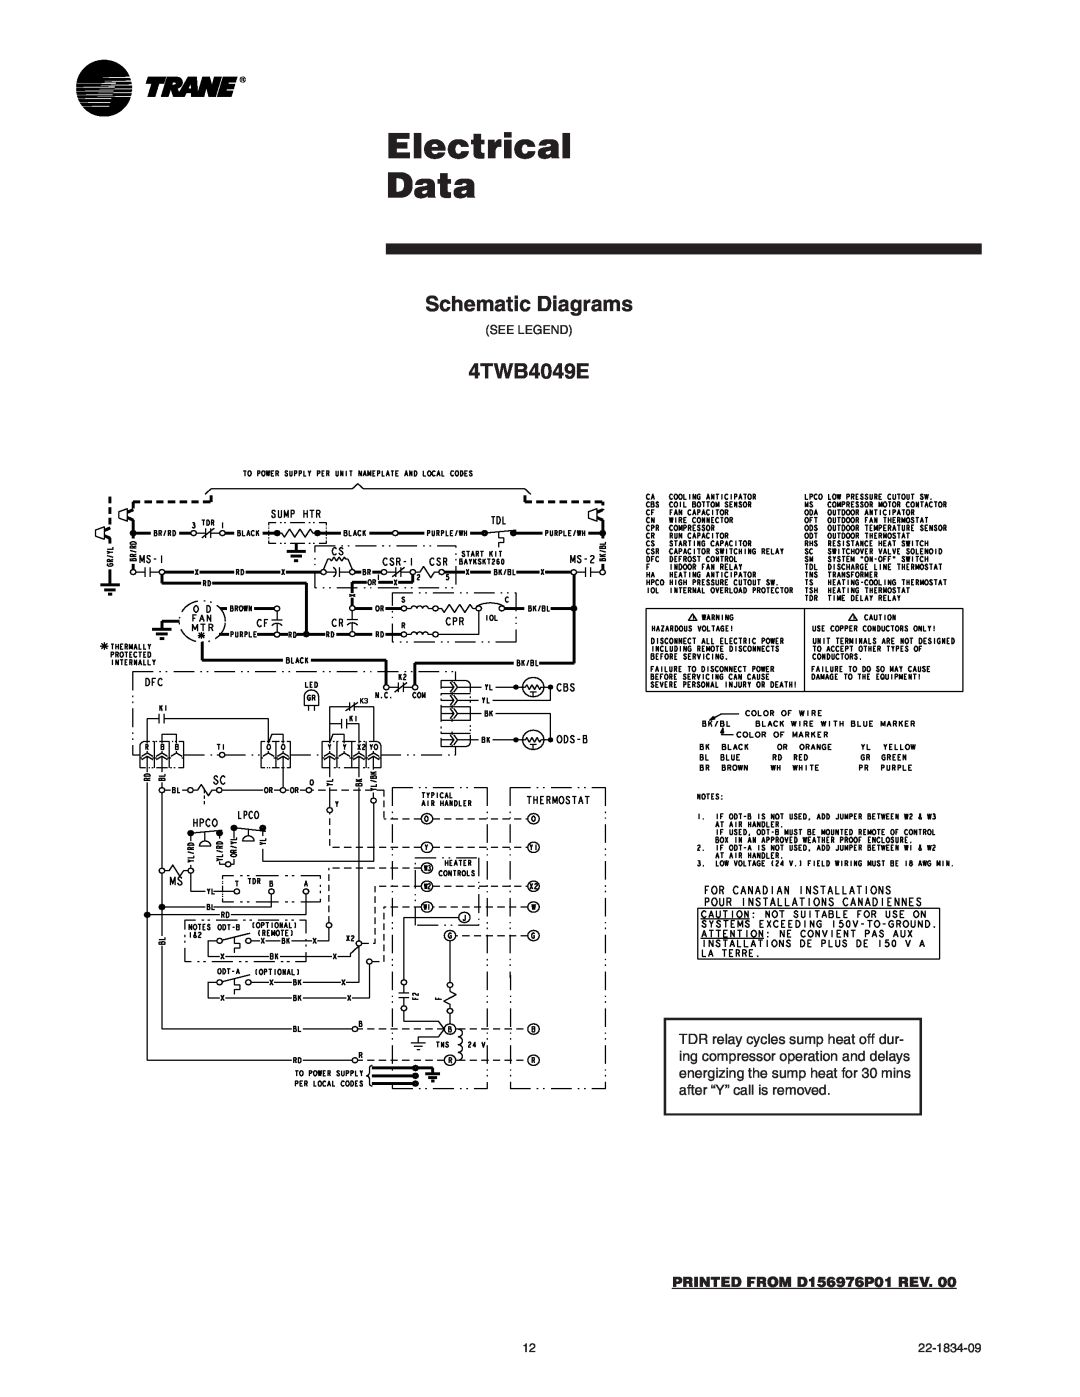 Trane manual Electrical Data, Schematic Diagrams, 4TWB4049E, PRINTED FROM D156976P01 REV 